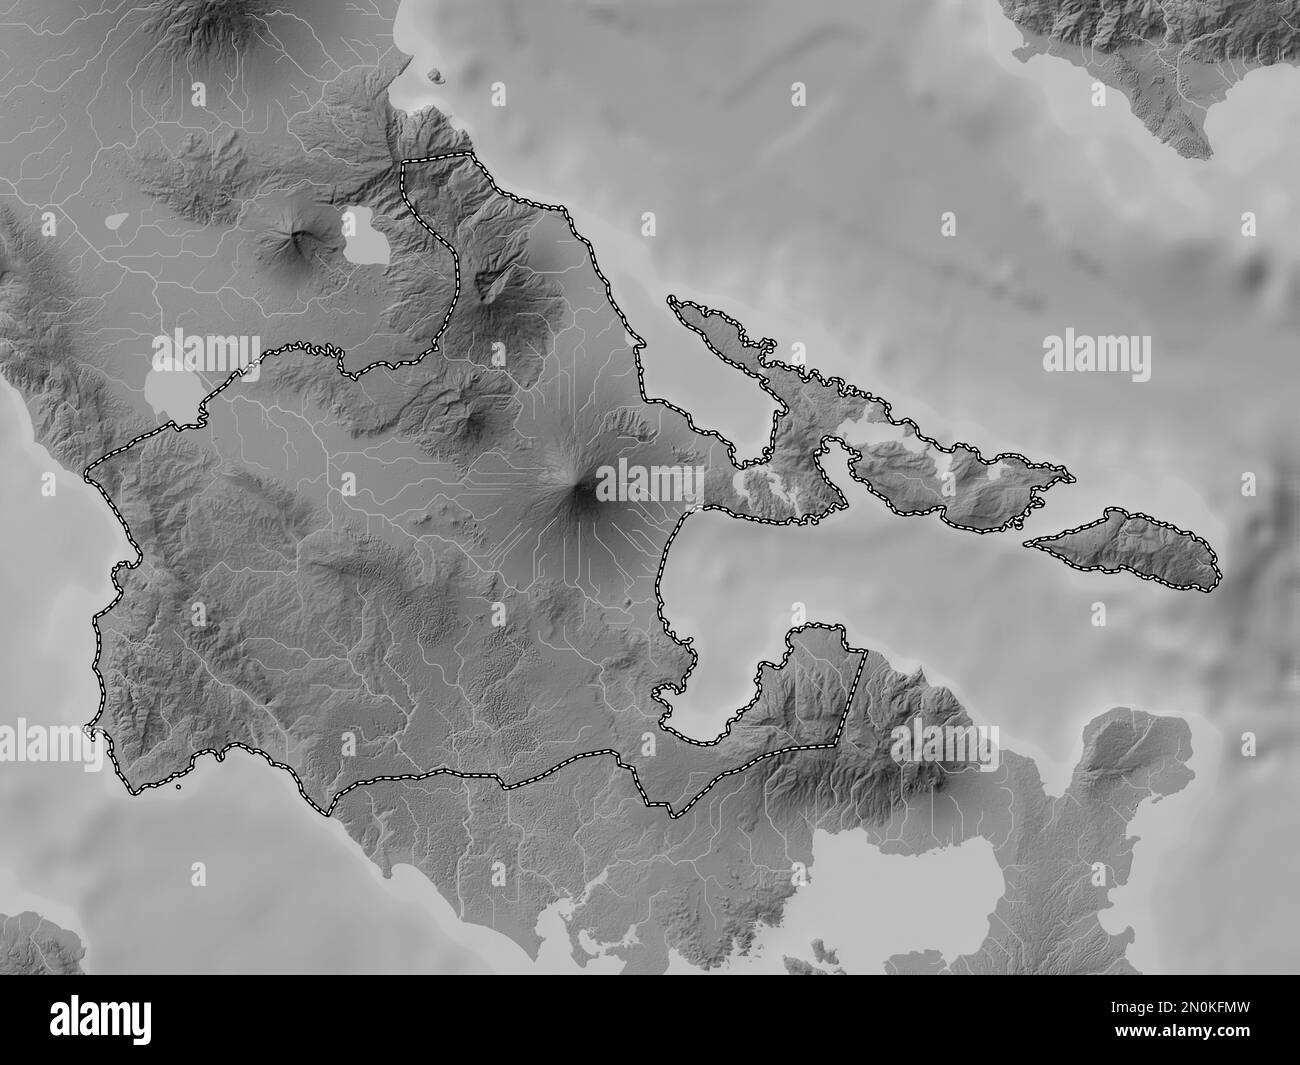 Albay, province of Philippines. Grayscale elevation map with lakes and rivers Stock Photo